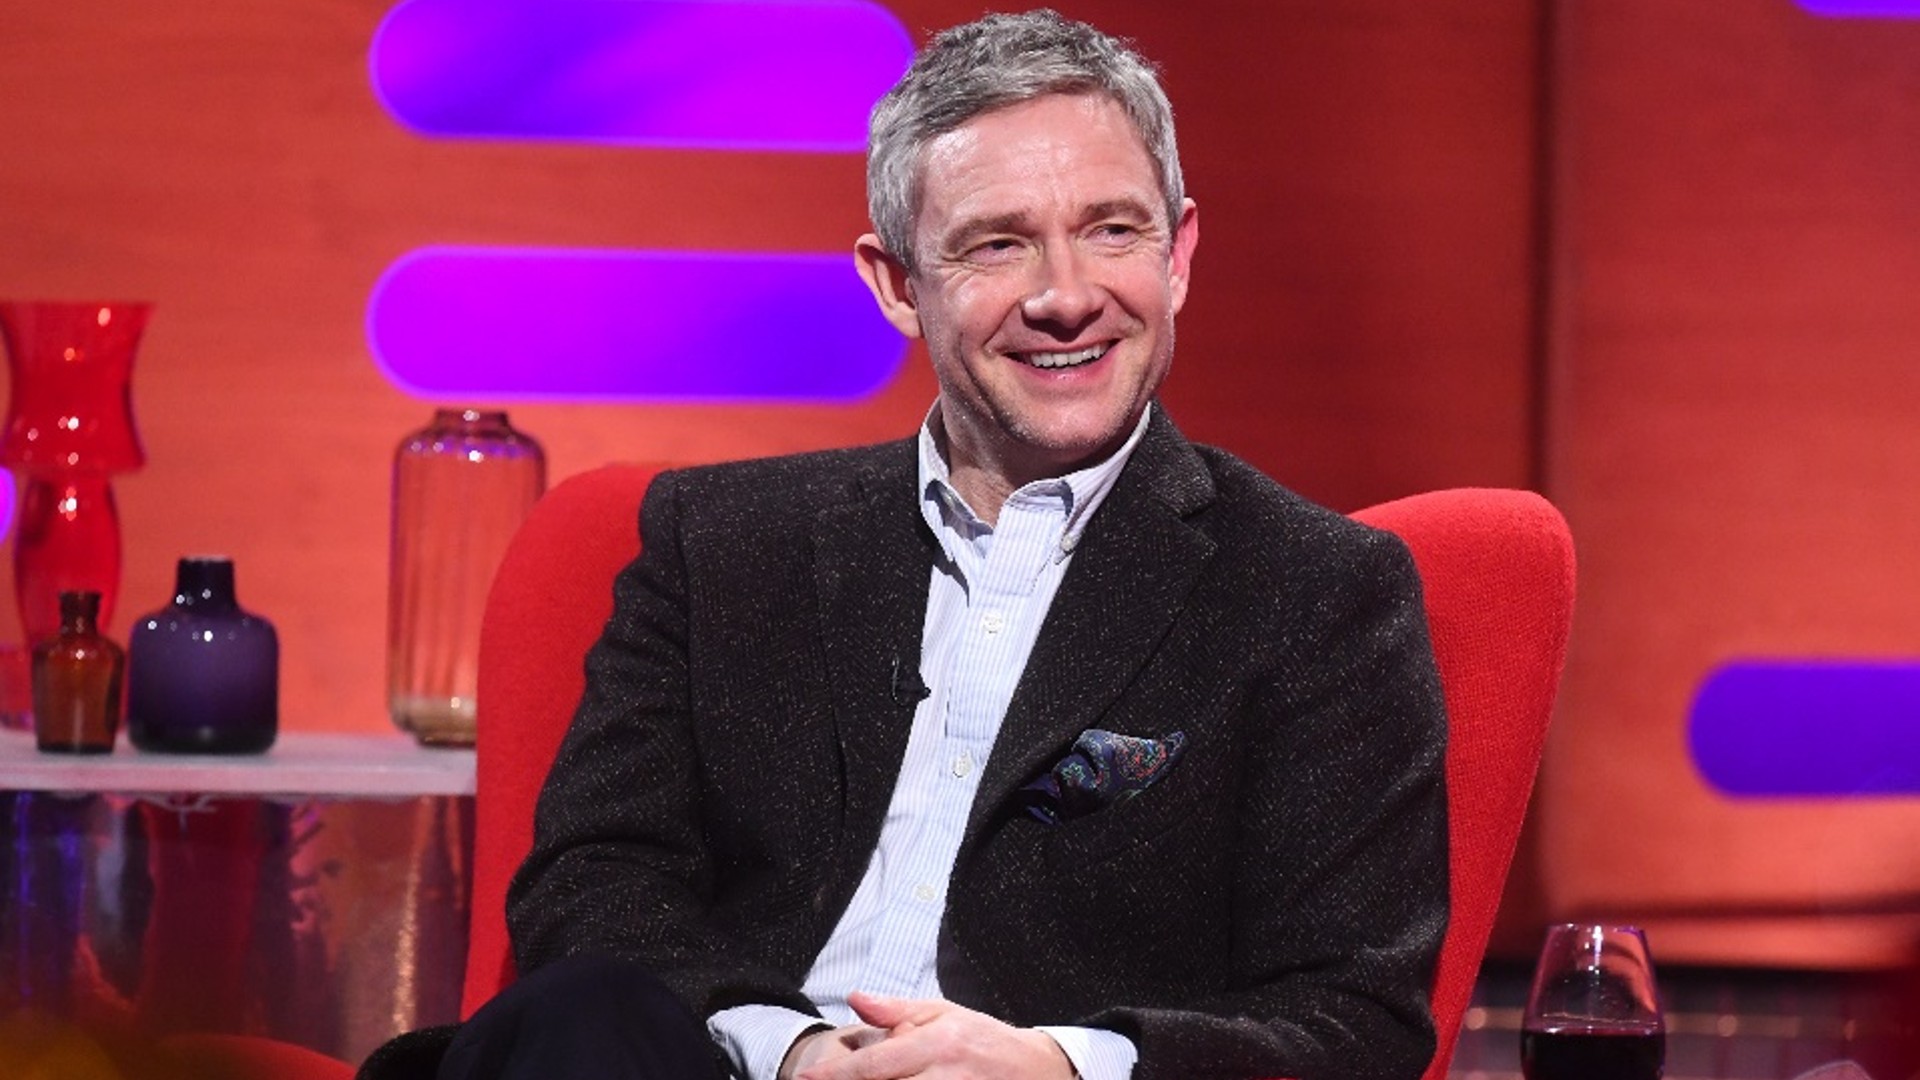 7 Times Martin Freeman Was a Gold Star Guest on ‘The Graham Norton Show’